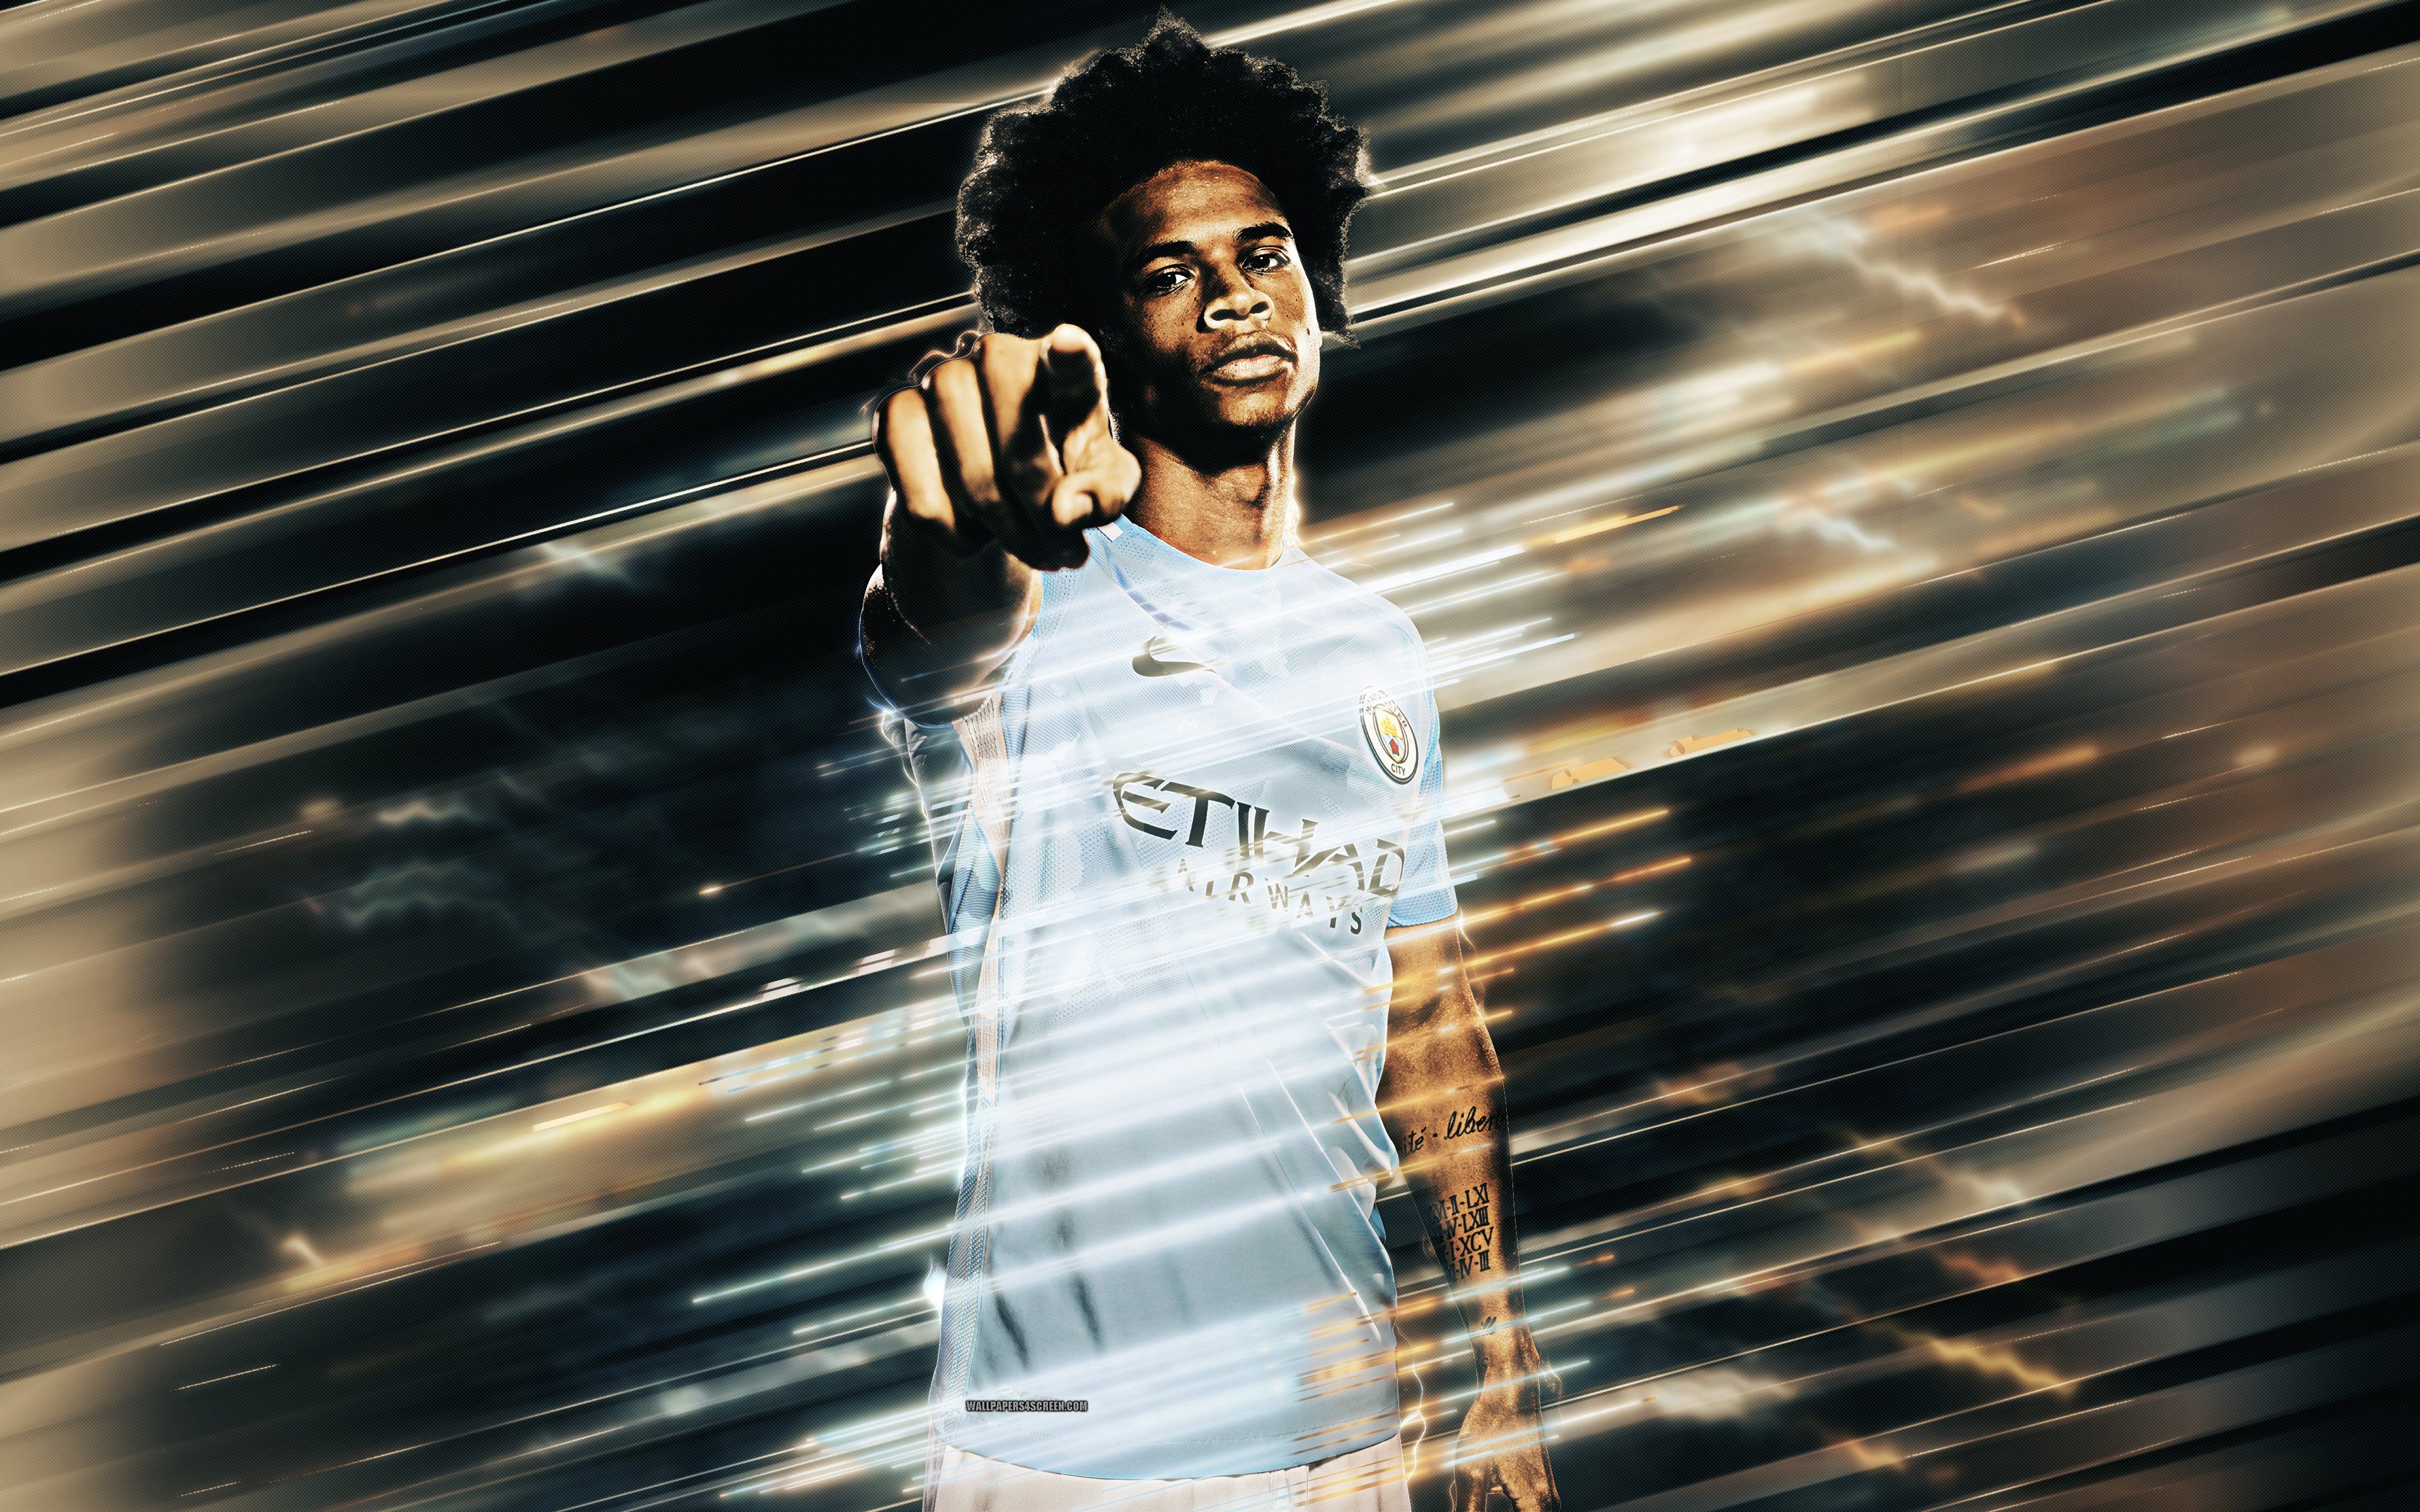 Download wallpaper Leroy Sane, portrait, Manchester City FC, German football player, striker, Premier League, England, football for desktop with resolution 3840x2400. High Quality HD picture wallpaper